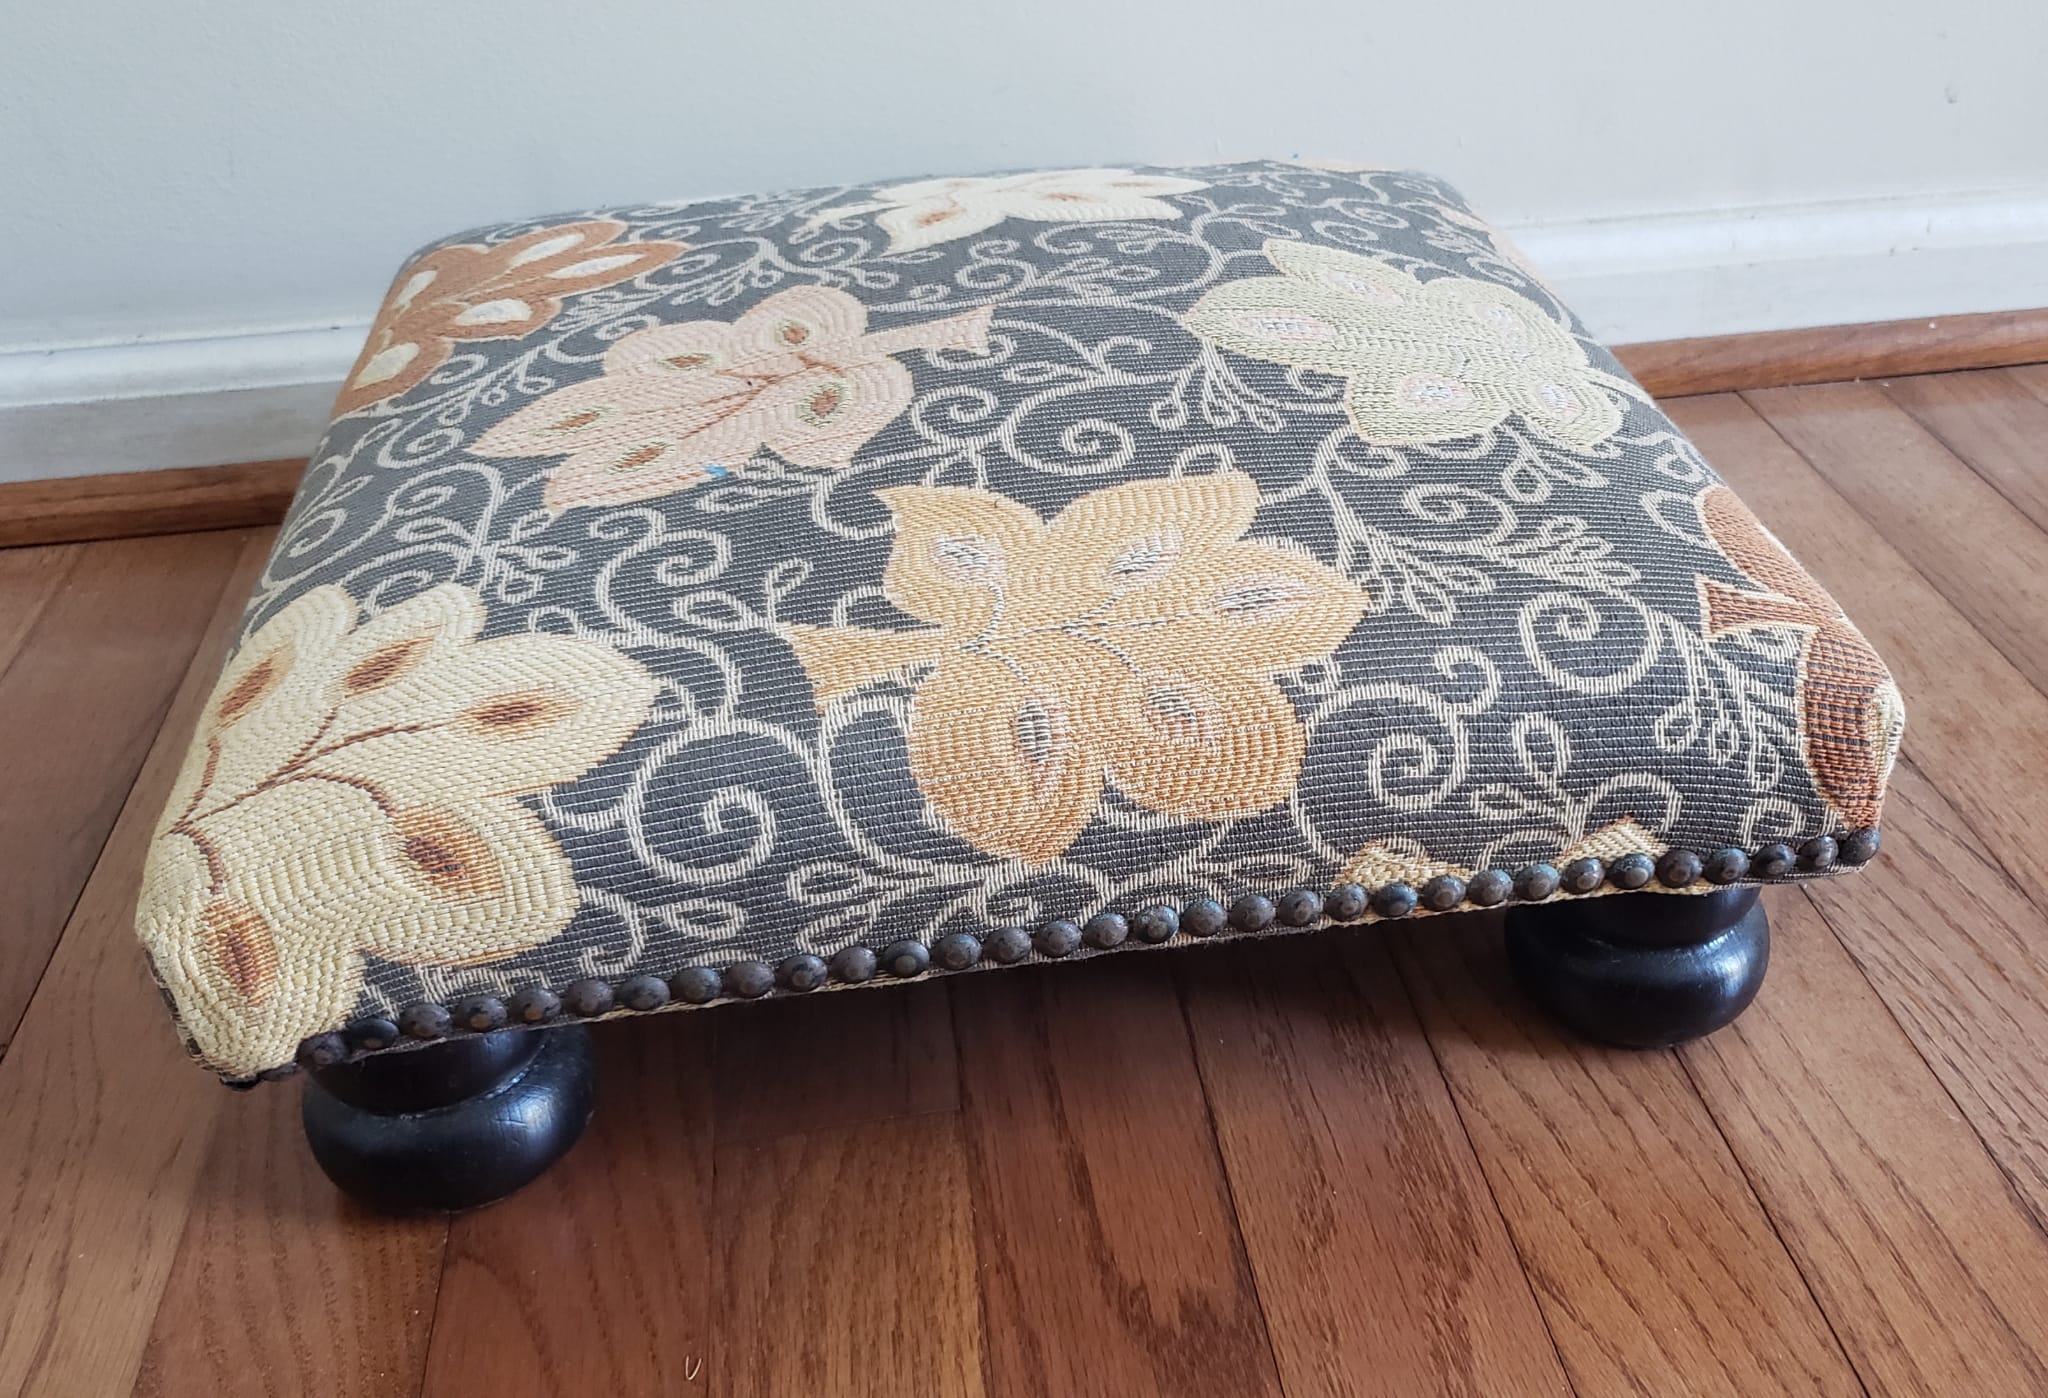 Late 20th Century Ebonized and Upholstered Footstool with NailHead Trims in great vintage condition.
Measures 14